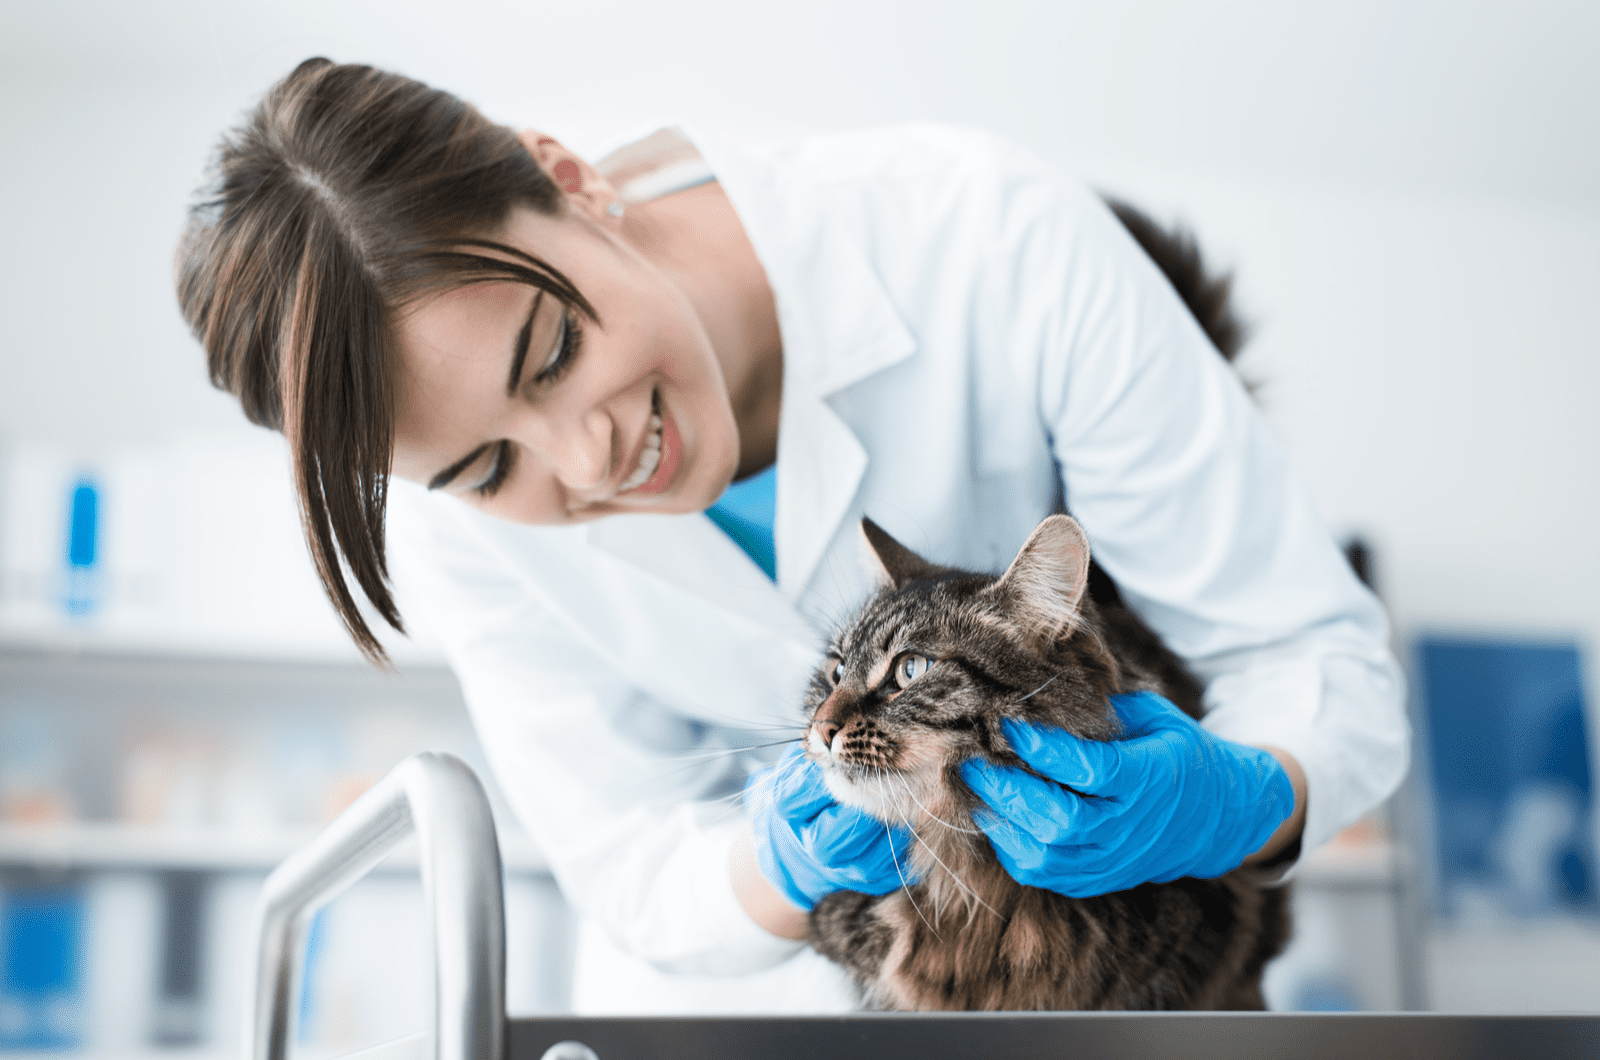 Smiling veterinarian examining a cat on the surgical table